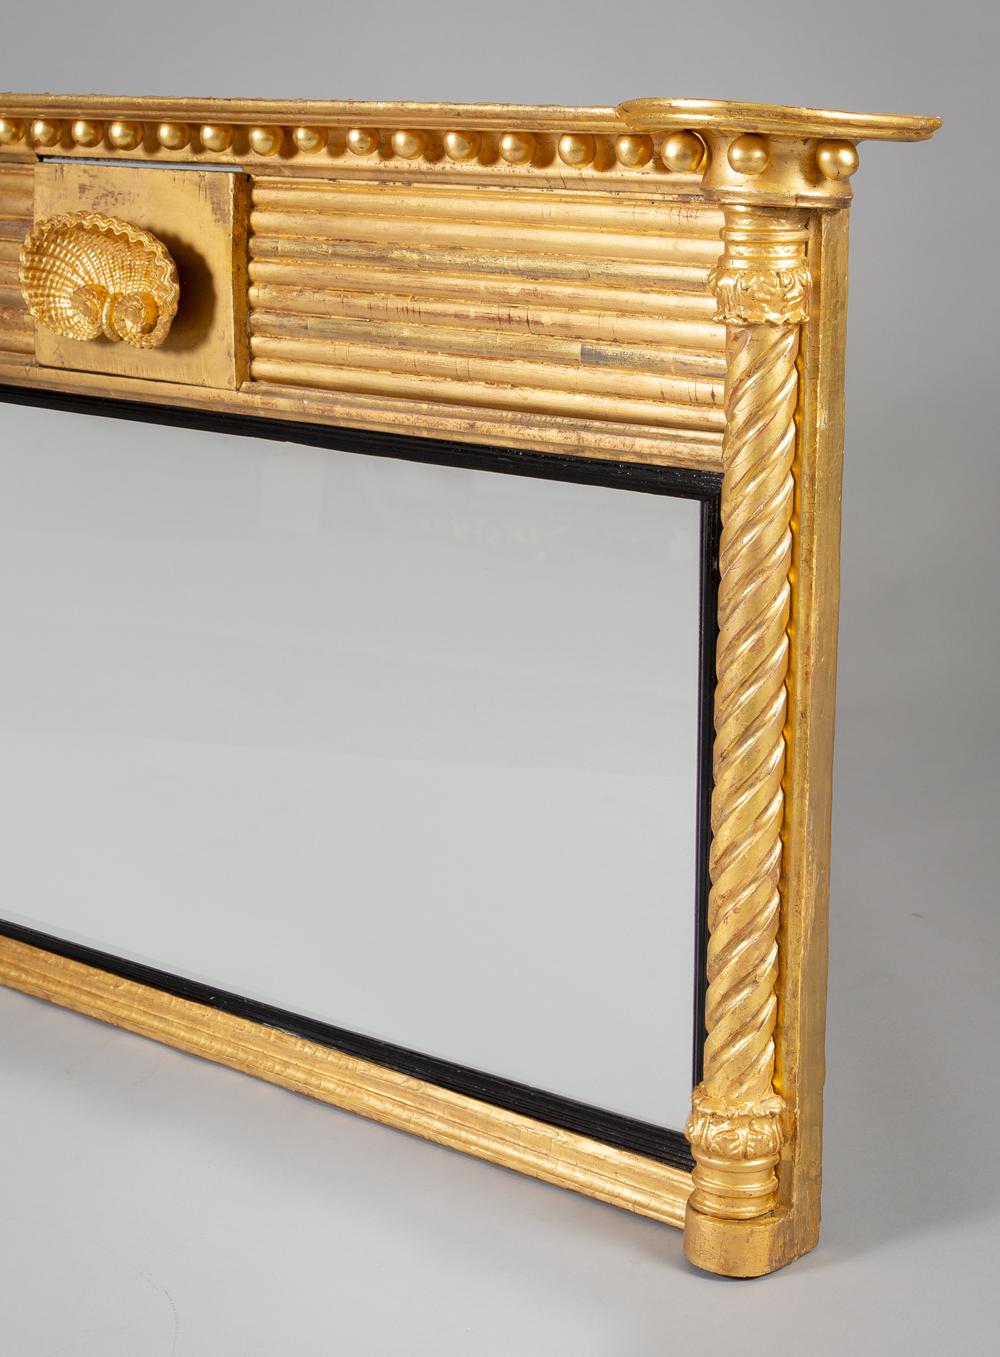 A Regency carved giltwood overmantle mirror, the molded cornice with protruding round corners, above ball spacers and a ribbed frieze decorated with a carved three-dimensional shell, the central mirror plate with ebonized reeded slip molding is